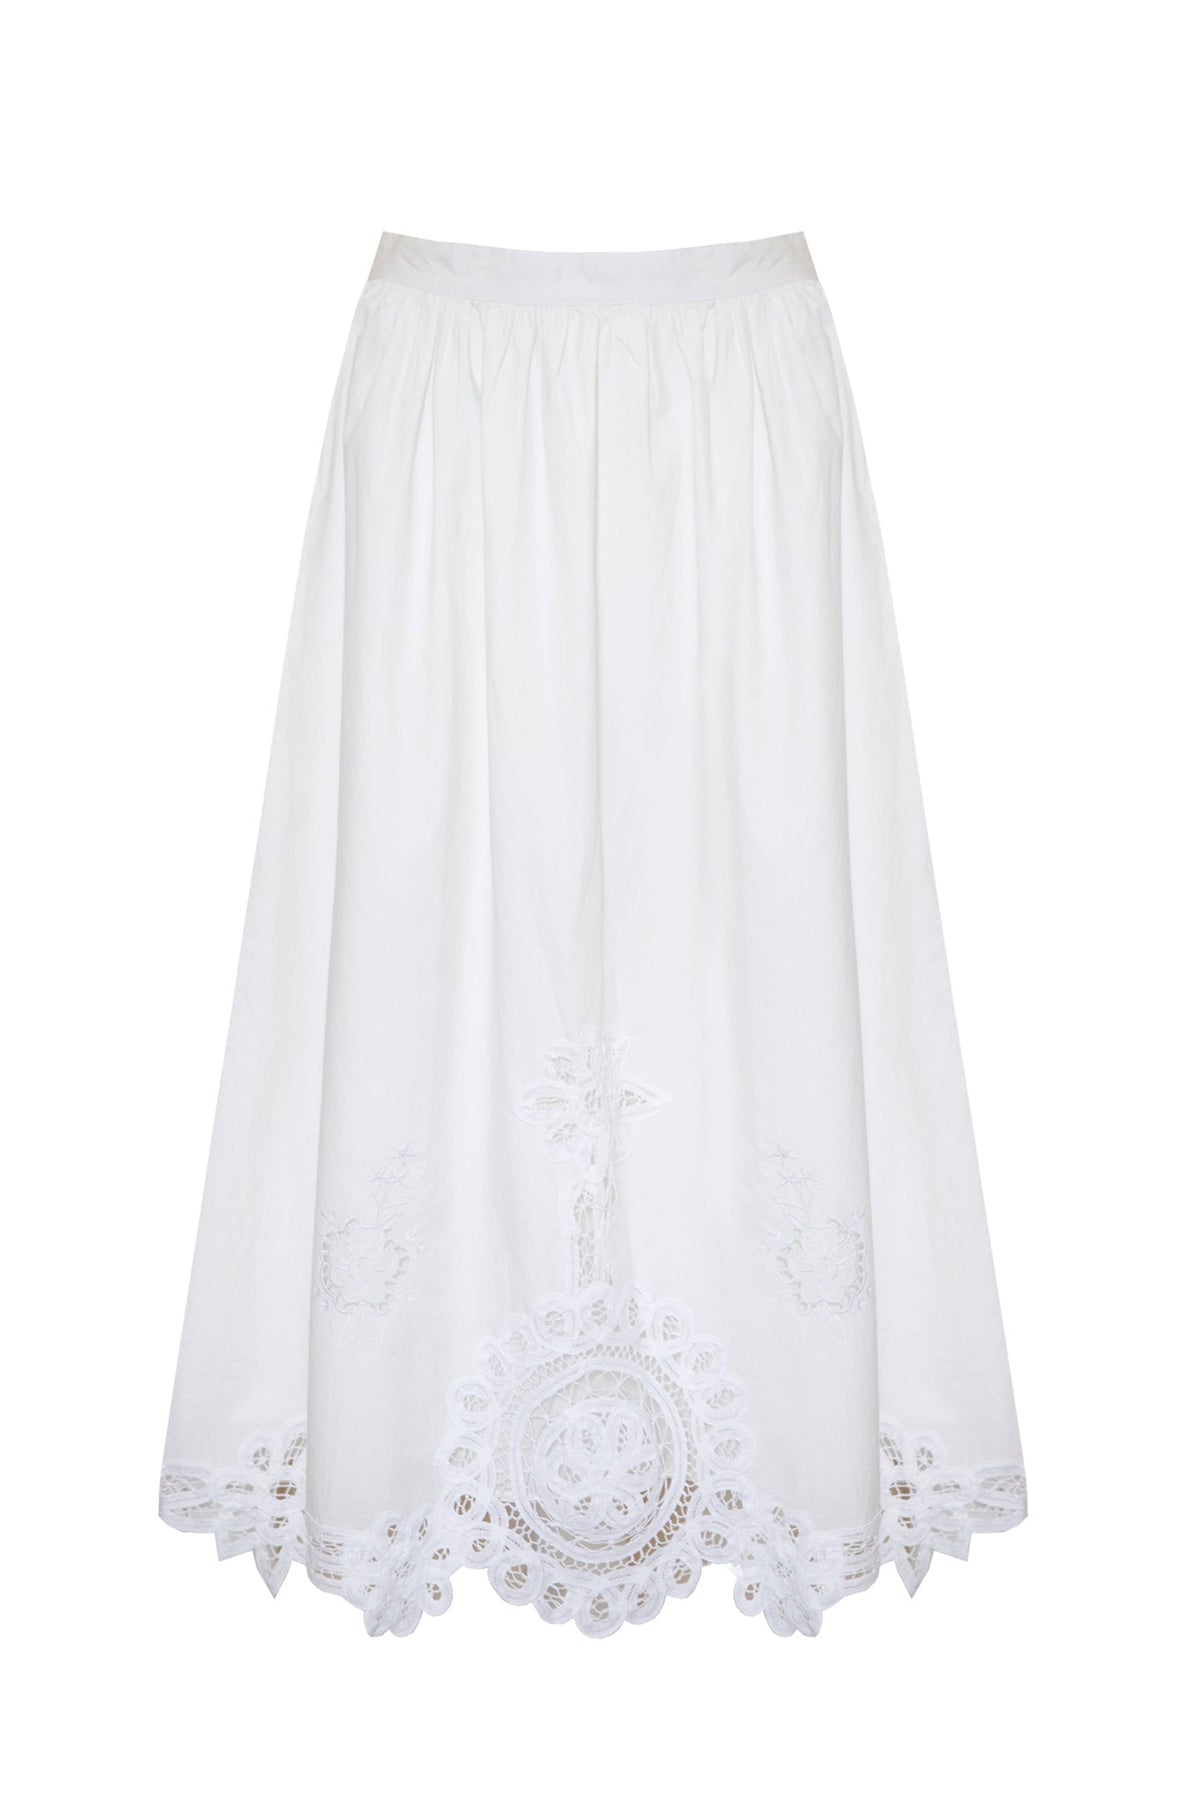 The Corrine midi skirt has intricate embroidery detailing and an eye-catching lace scalloped hem.